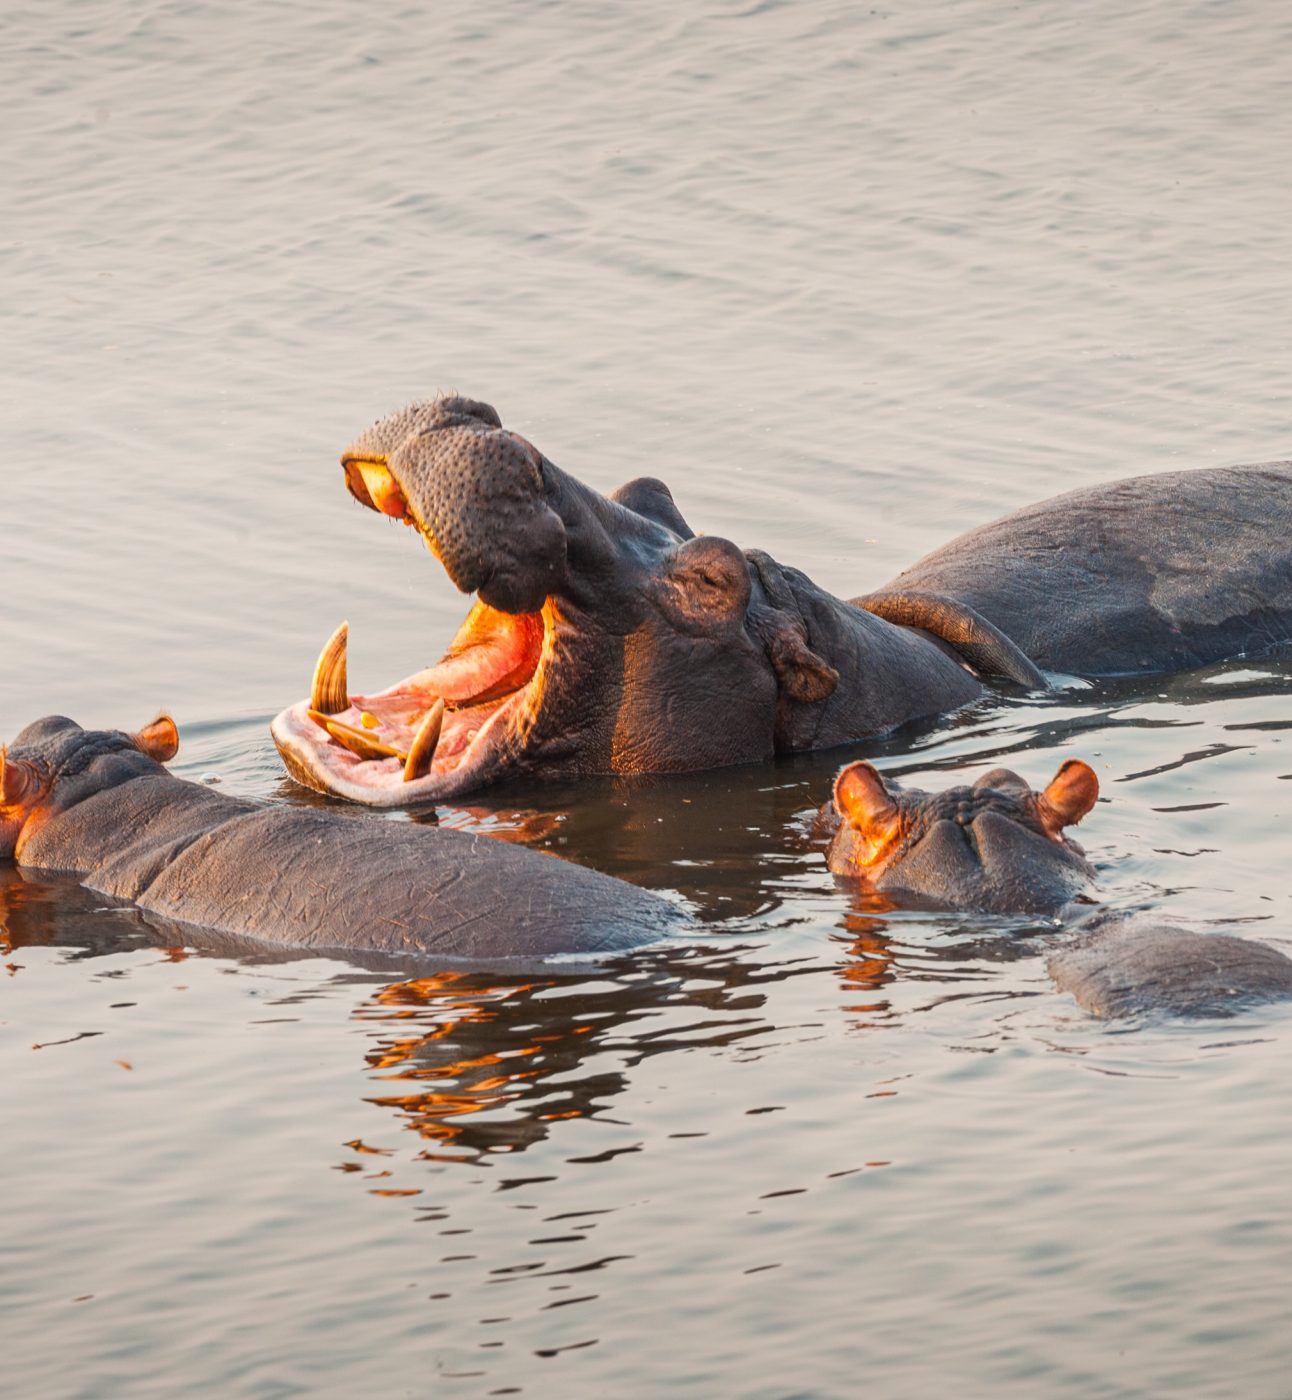 A group of three hippos in the water